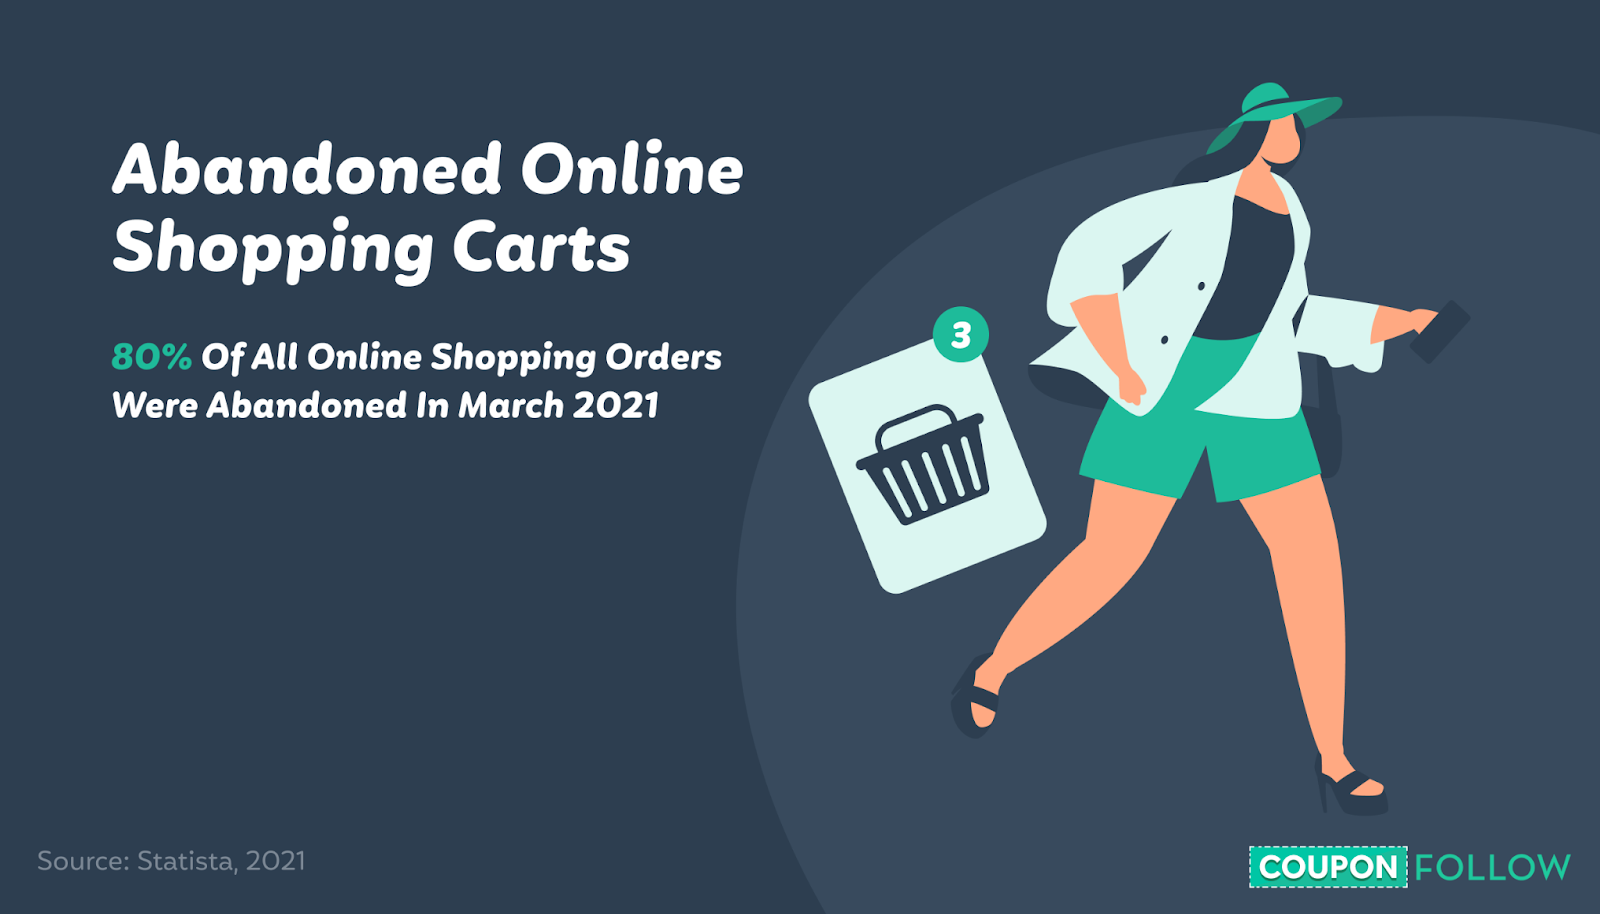 Image showing the percentage of online shopping carts that were abandoned in March 2021